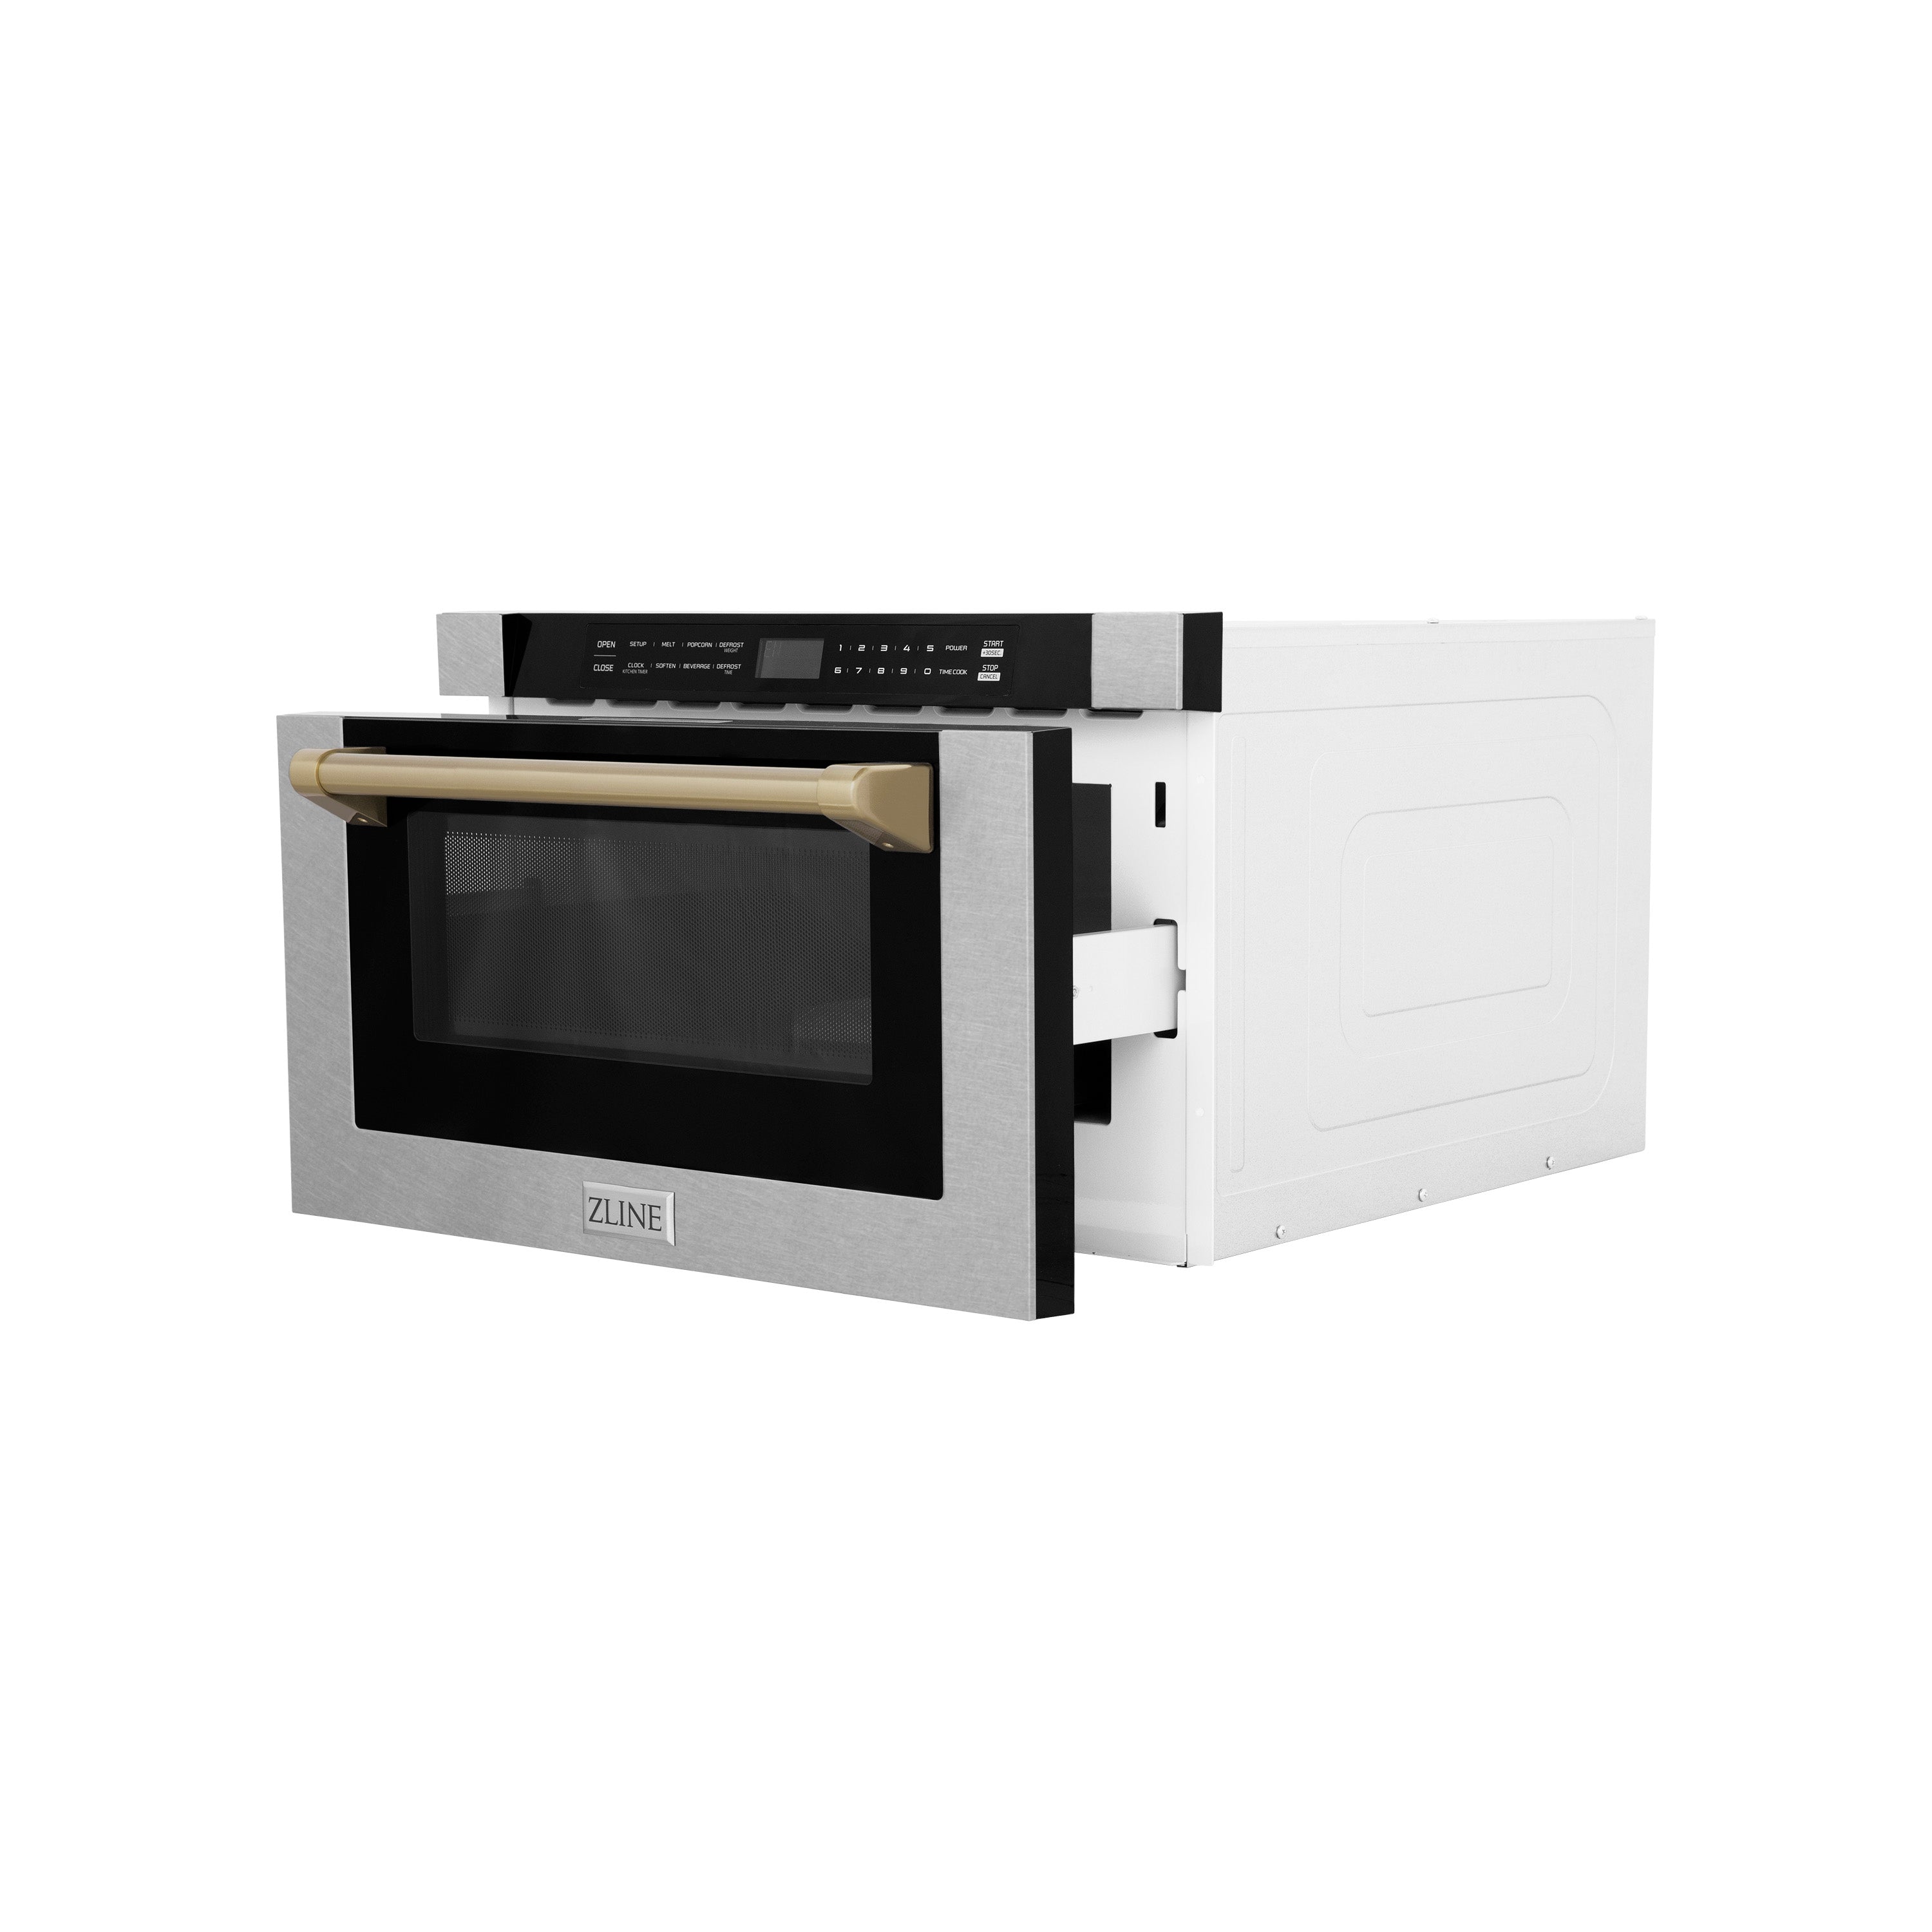 ZLINE Autograph Edition 24" 1.2 cu. ft. Built-in Microwave Drawer with a Traditional Handle in Fingerprint Resistant Stainless Steel and Champagne Bronze Accents